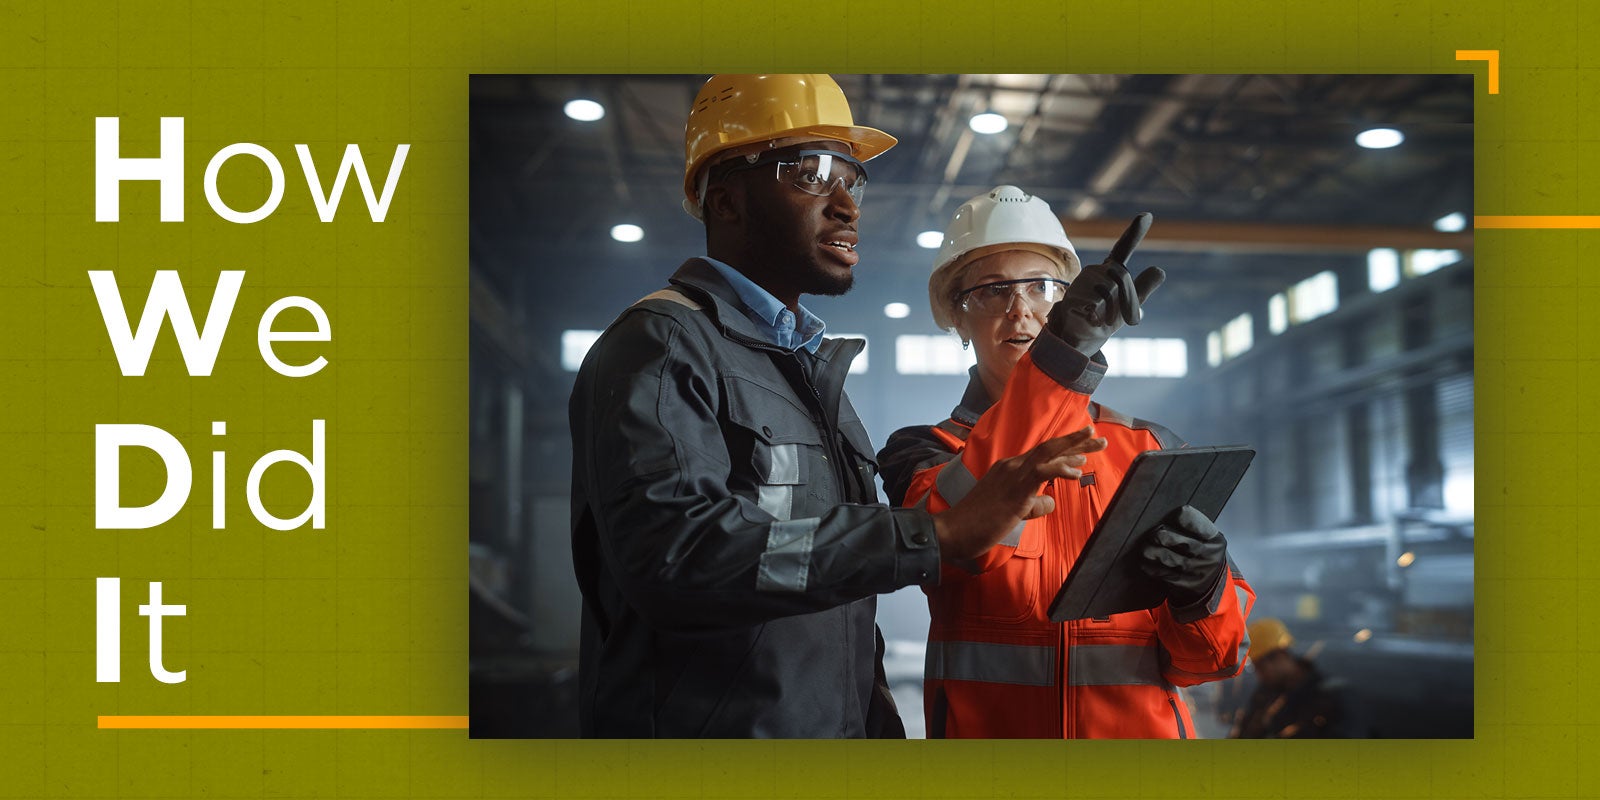 How We Did It written to the left with a picture of two manufacturing leaders, hard hats and safety goggles on, to show this video is about how DDI helped one company drive a culture of safety 